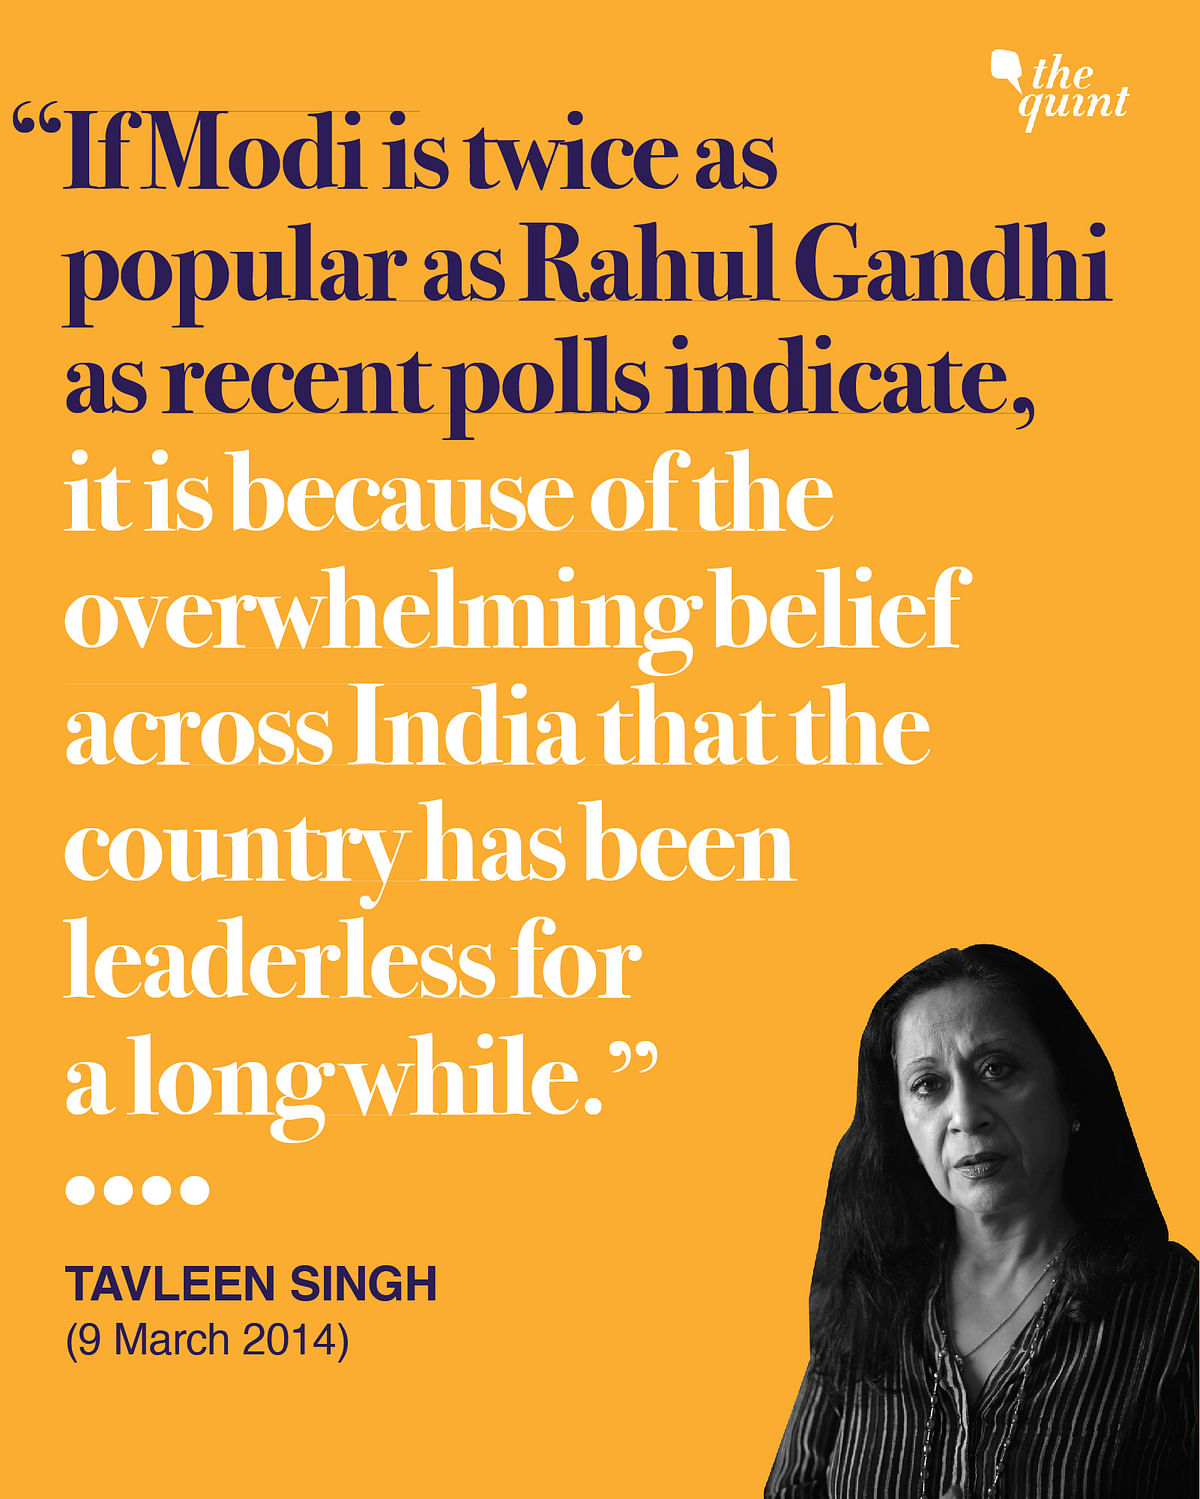 The so-called Lutyens’ Delhi cabal brought Modi to power, and they could be the ones to oust him, says Raghav Bahl.